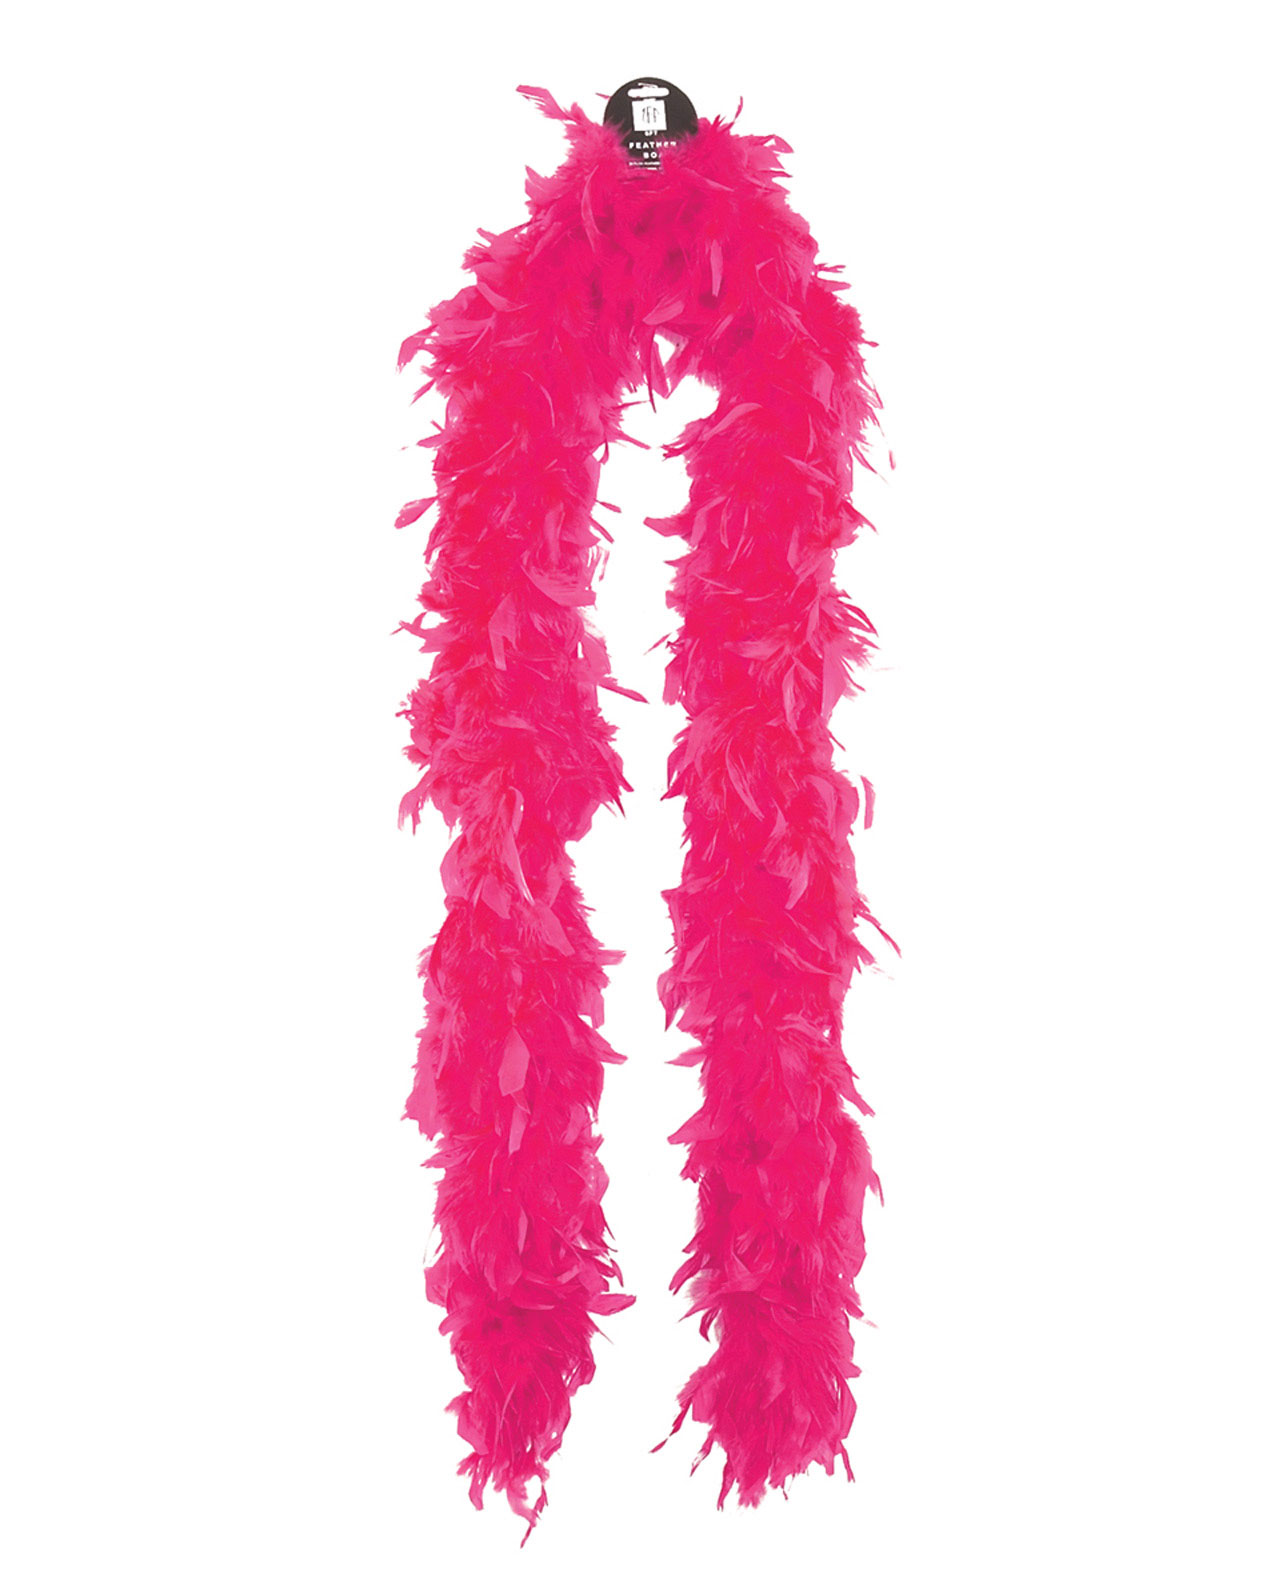 Zucker feather products Men's Medium weight feather boa - hot pink - One Size